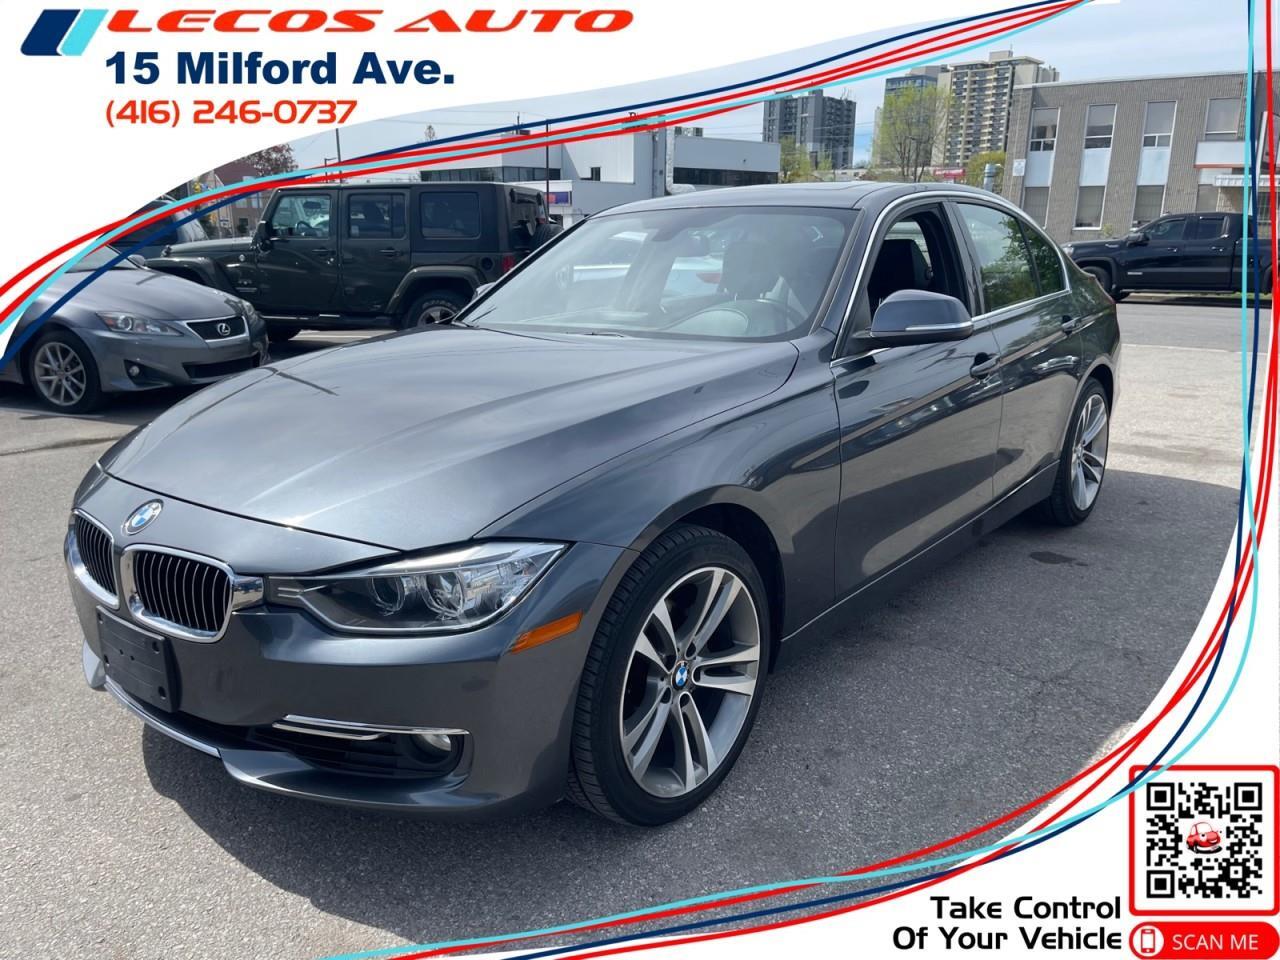 2015 BMW 328 i xDrive 2015 BMW 328 X Dr. features include navig